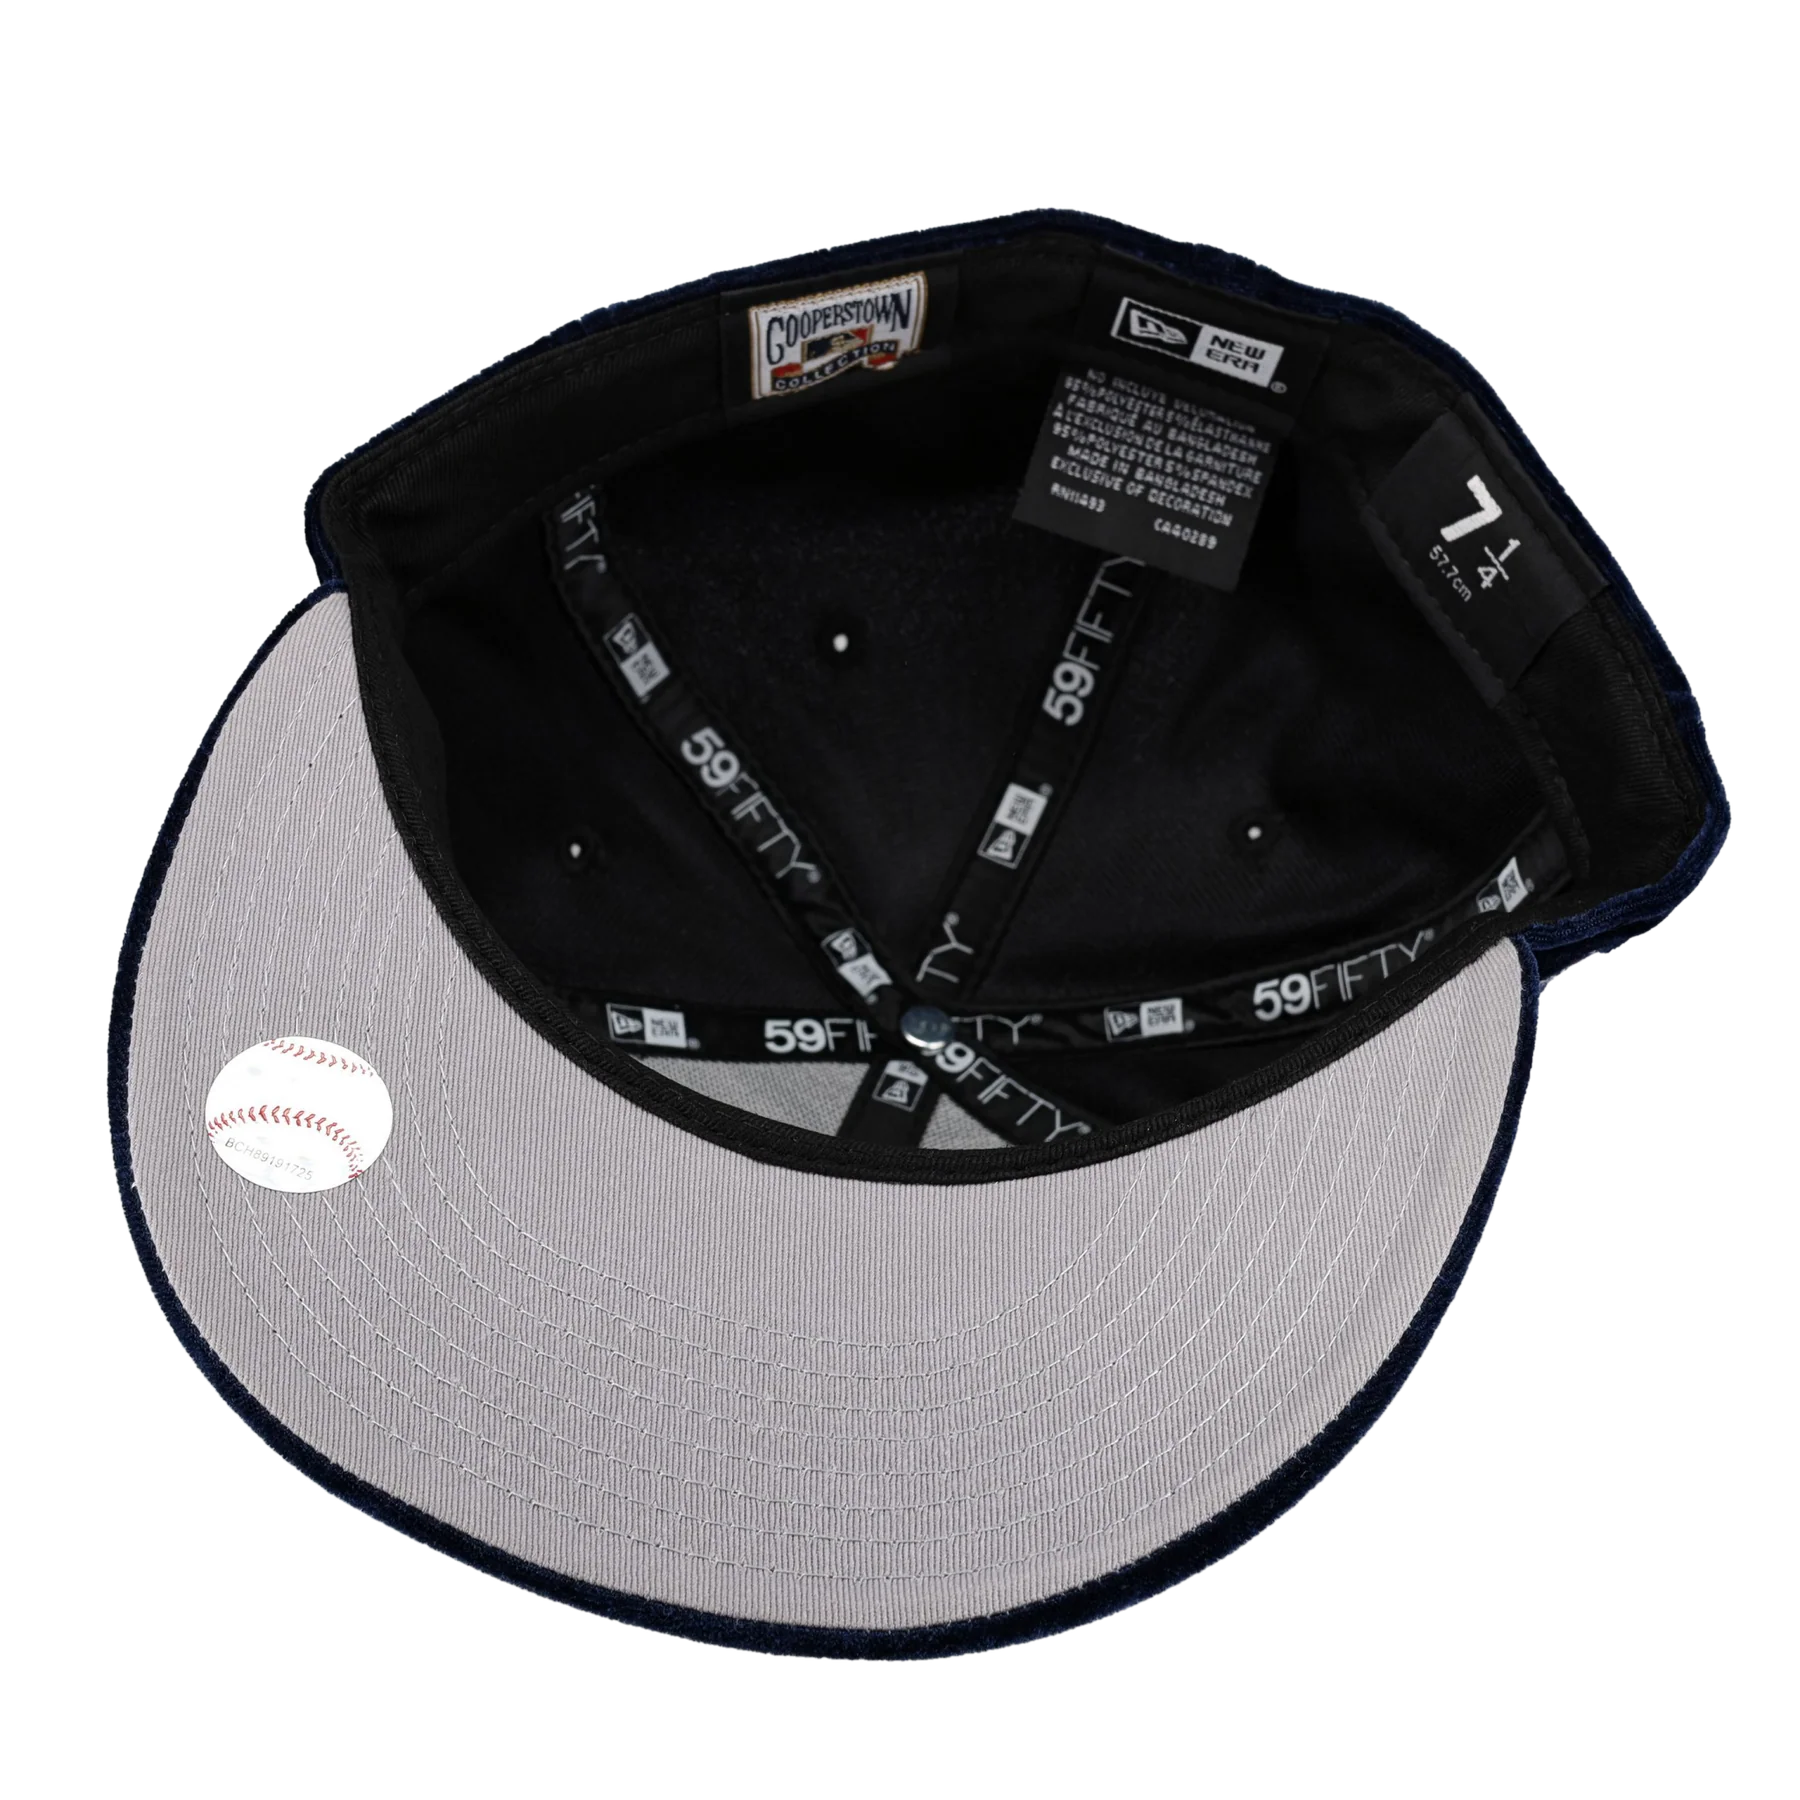 New Era New York Yankees Dogtown 1999 World Series Patch Hat Club Exclusive 59FIFTY Fitted Hat White/Teal